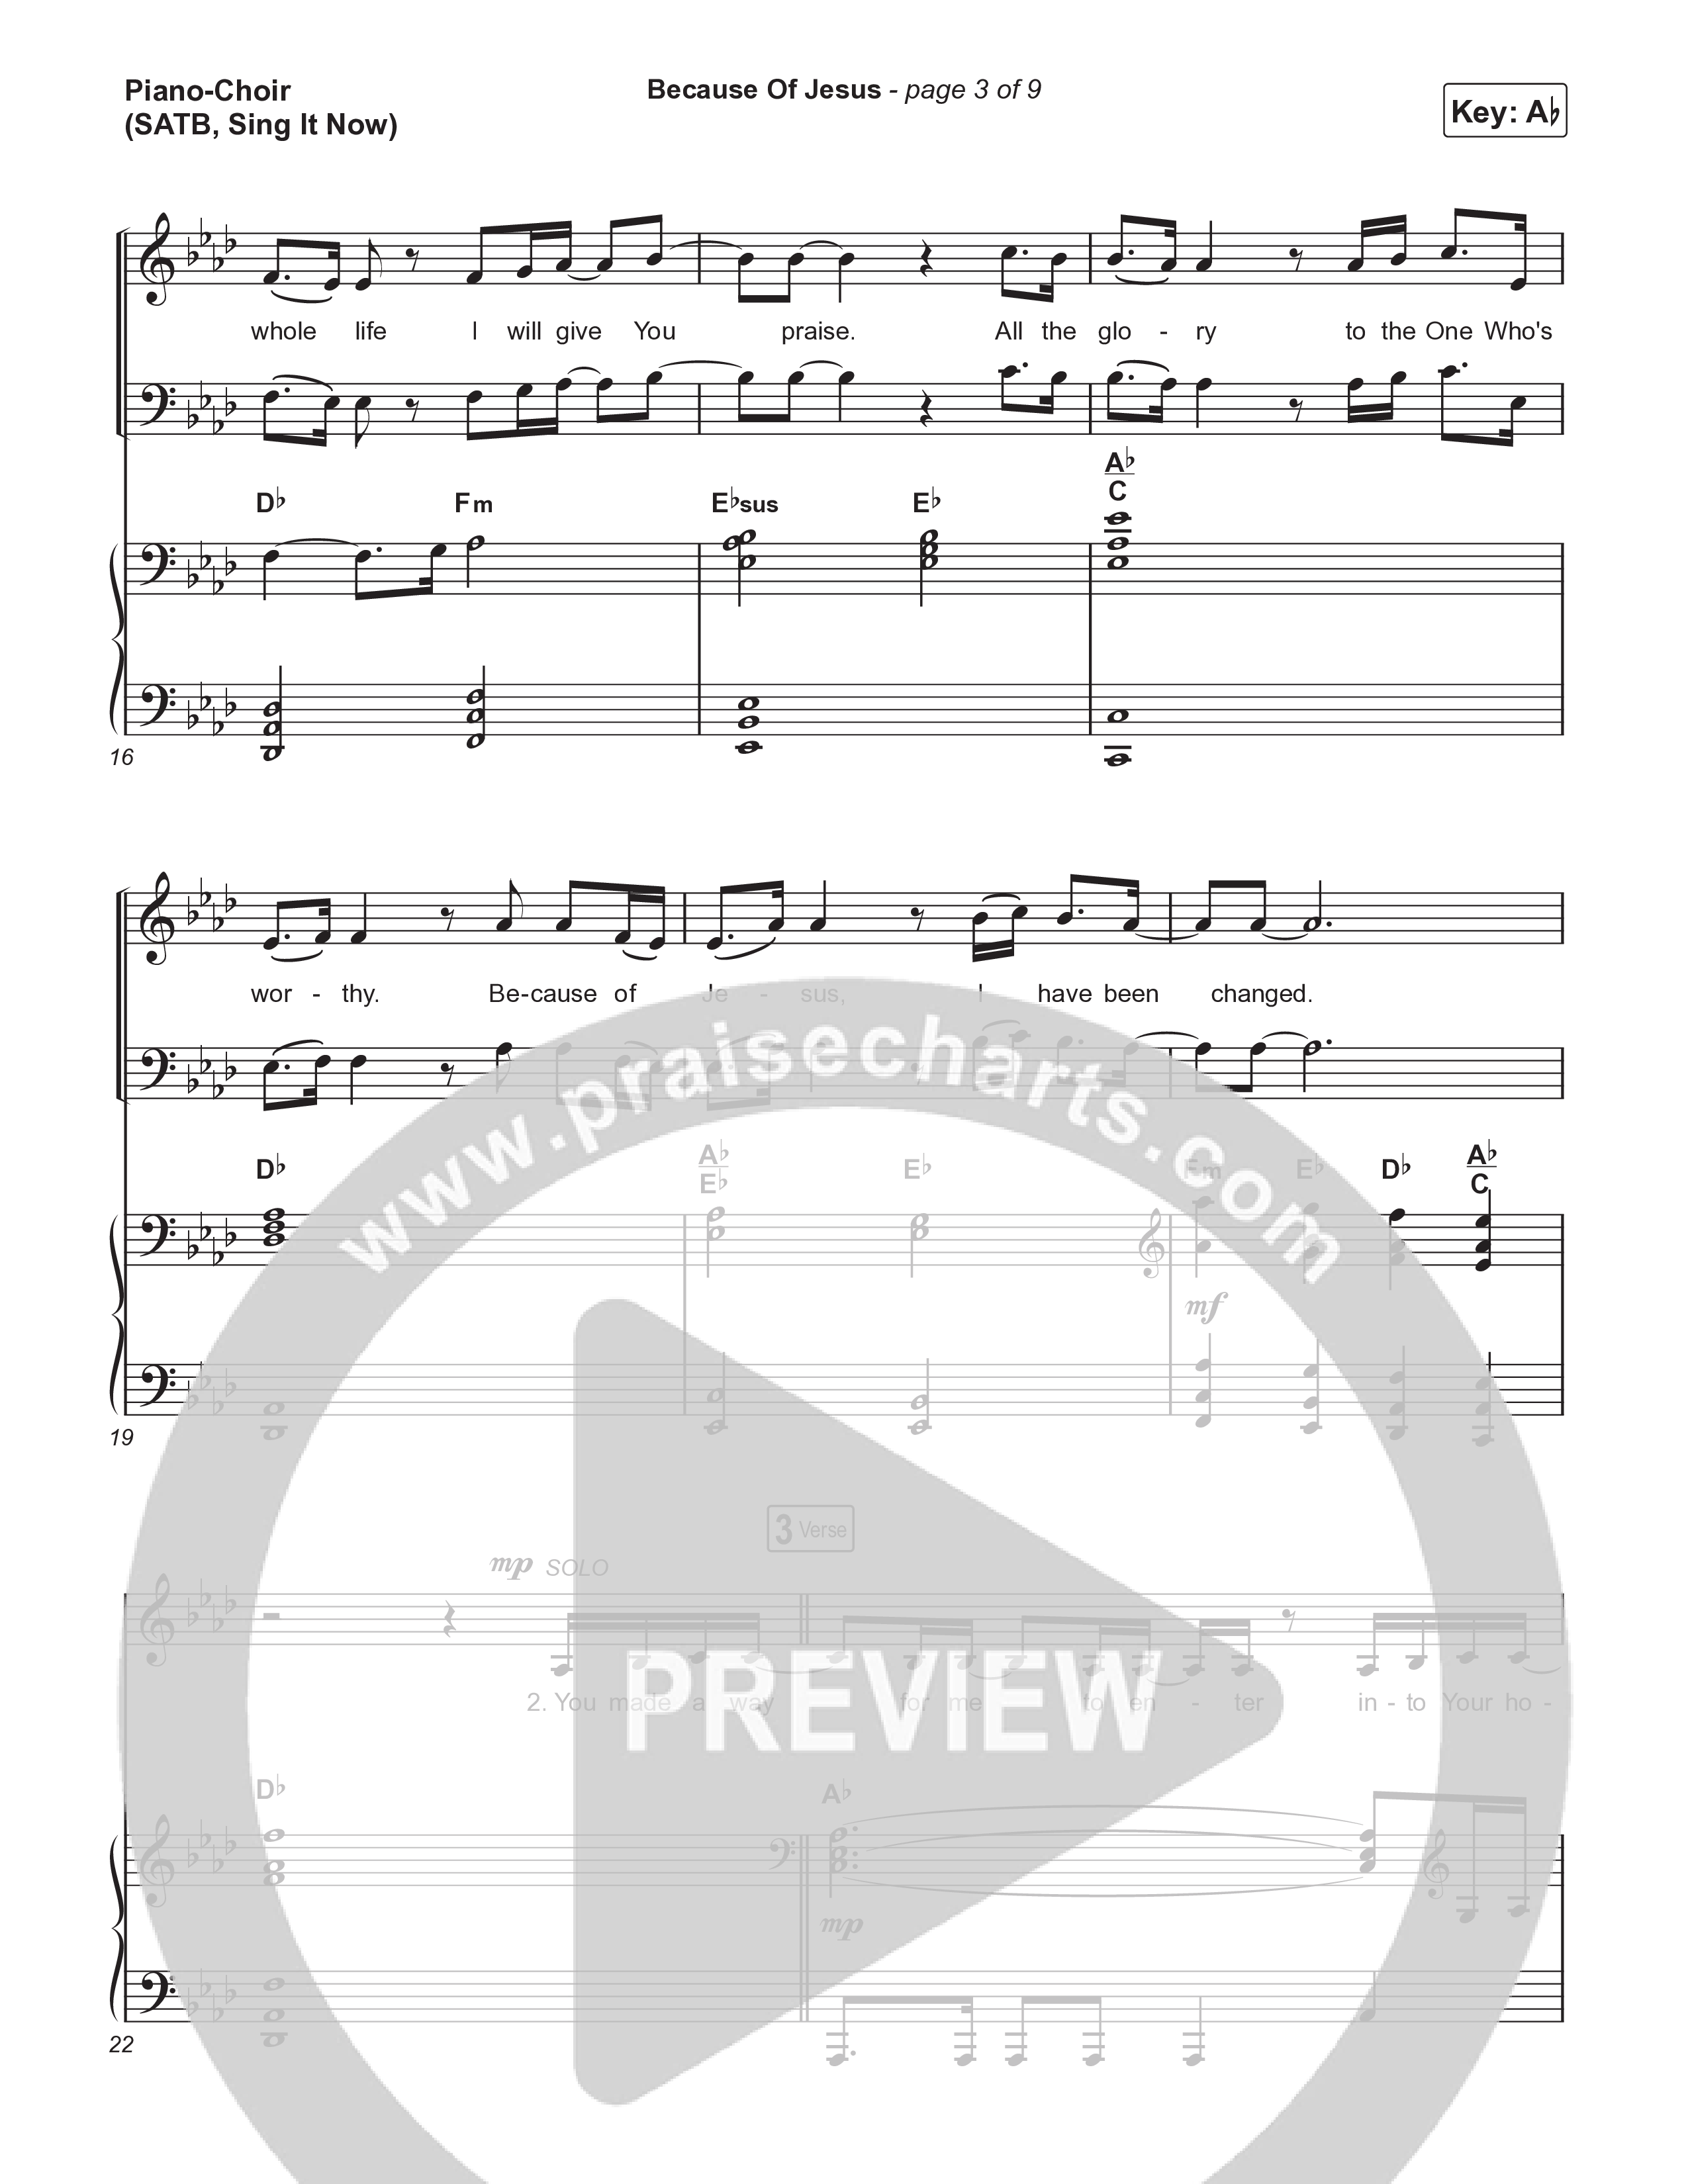 Because Of Jesus (Sing It Now) Piano/Choir (SATB) (Charity Gayle / Arr. Luke Gambill)